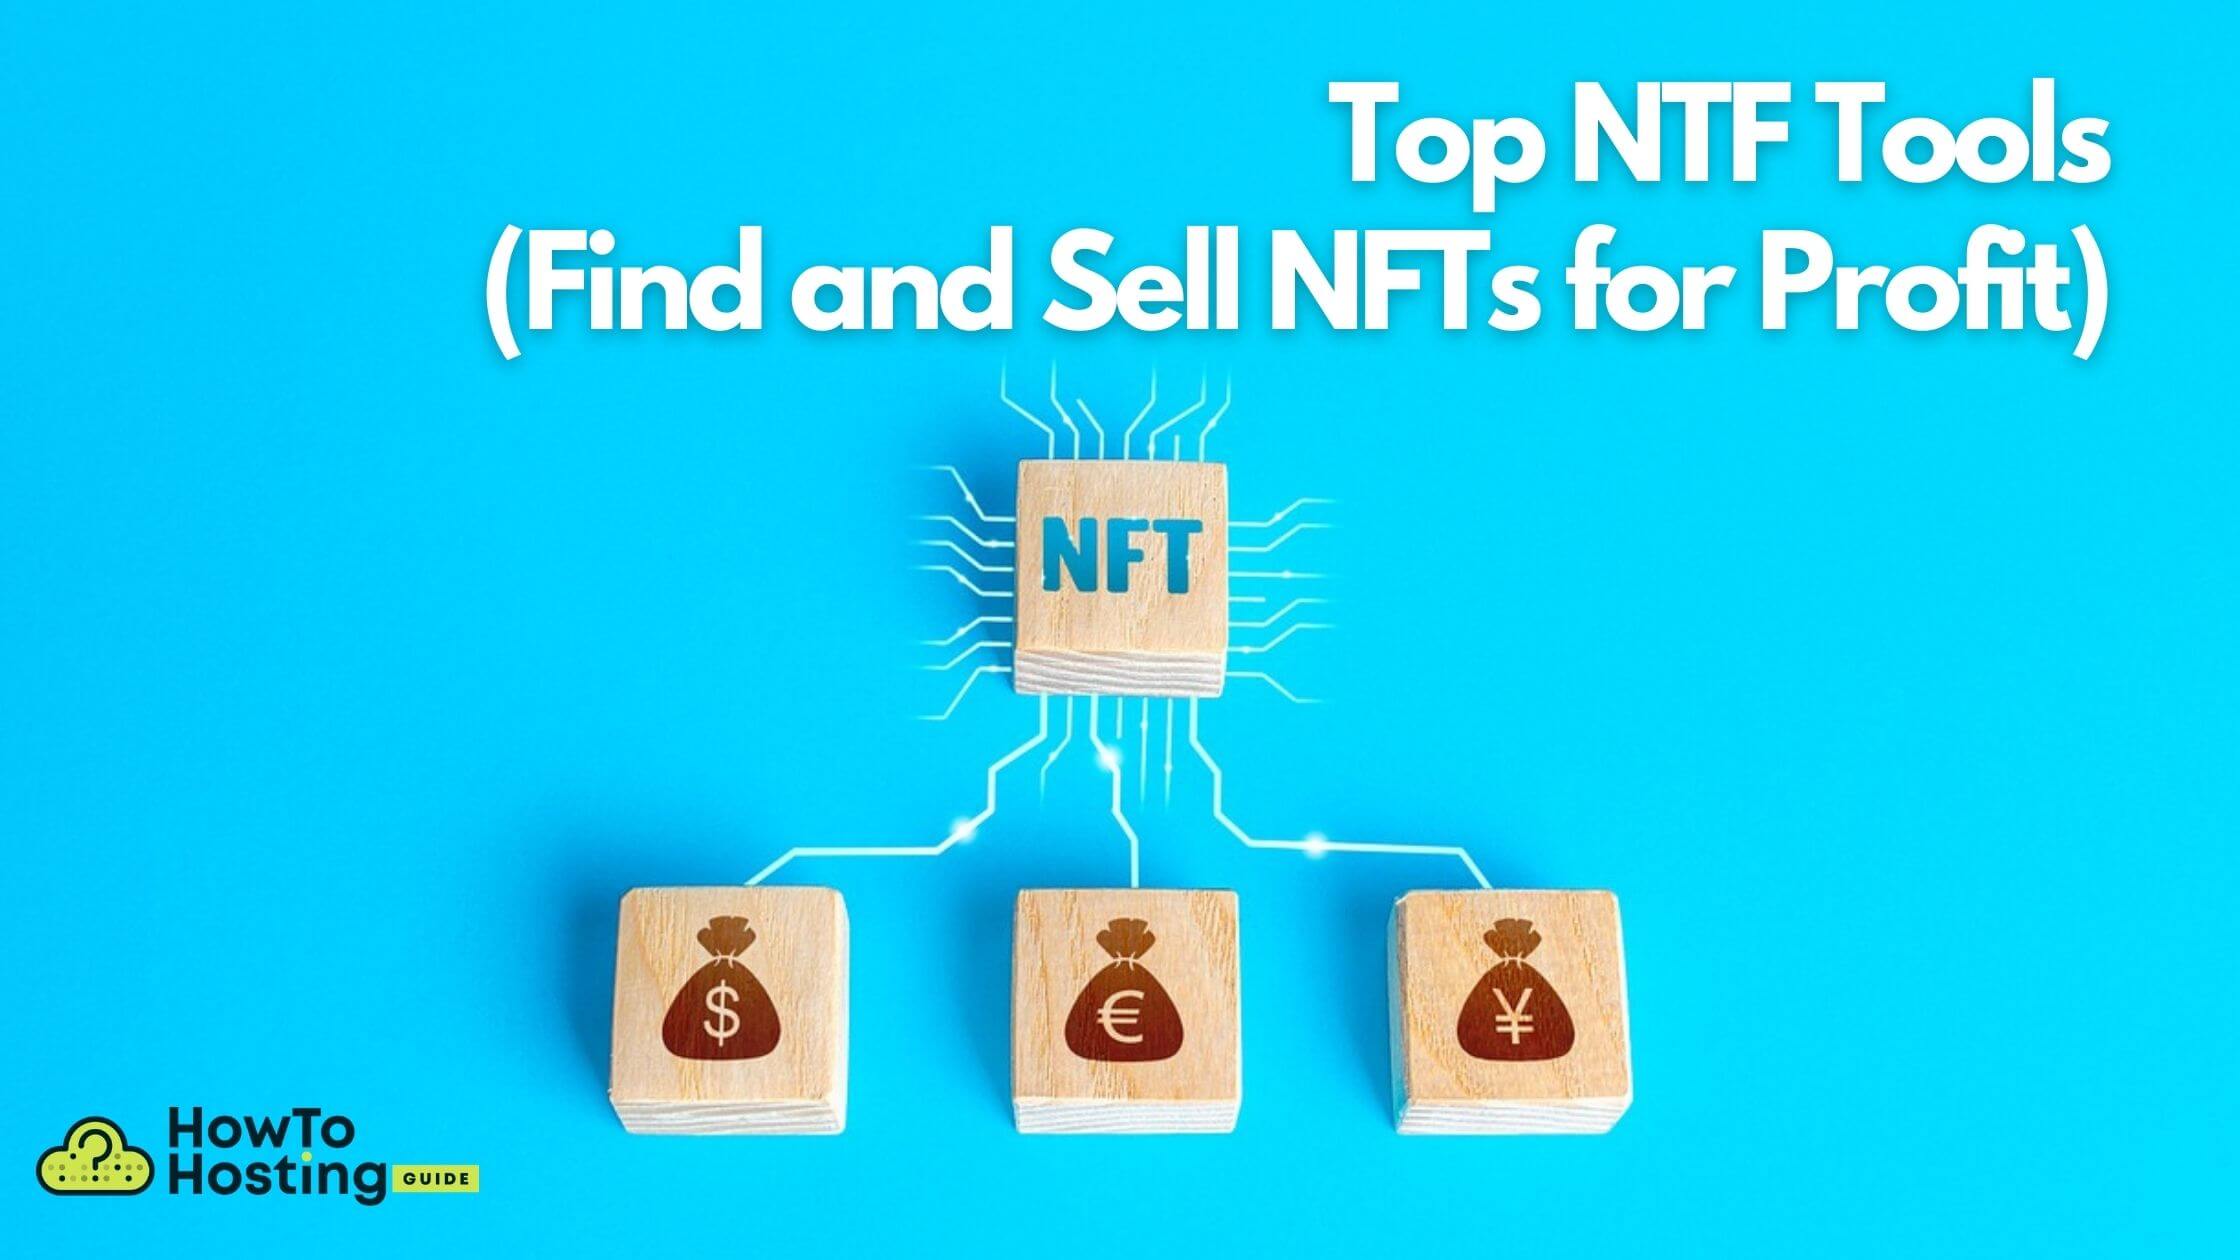 o-best-nft-tools-to-find-sell-nft-for-profit-hth-guide